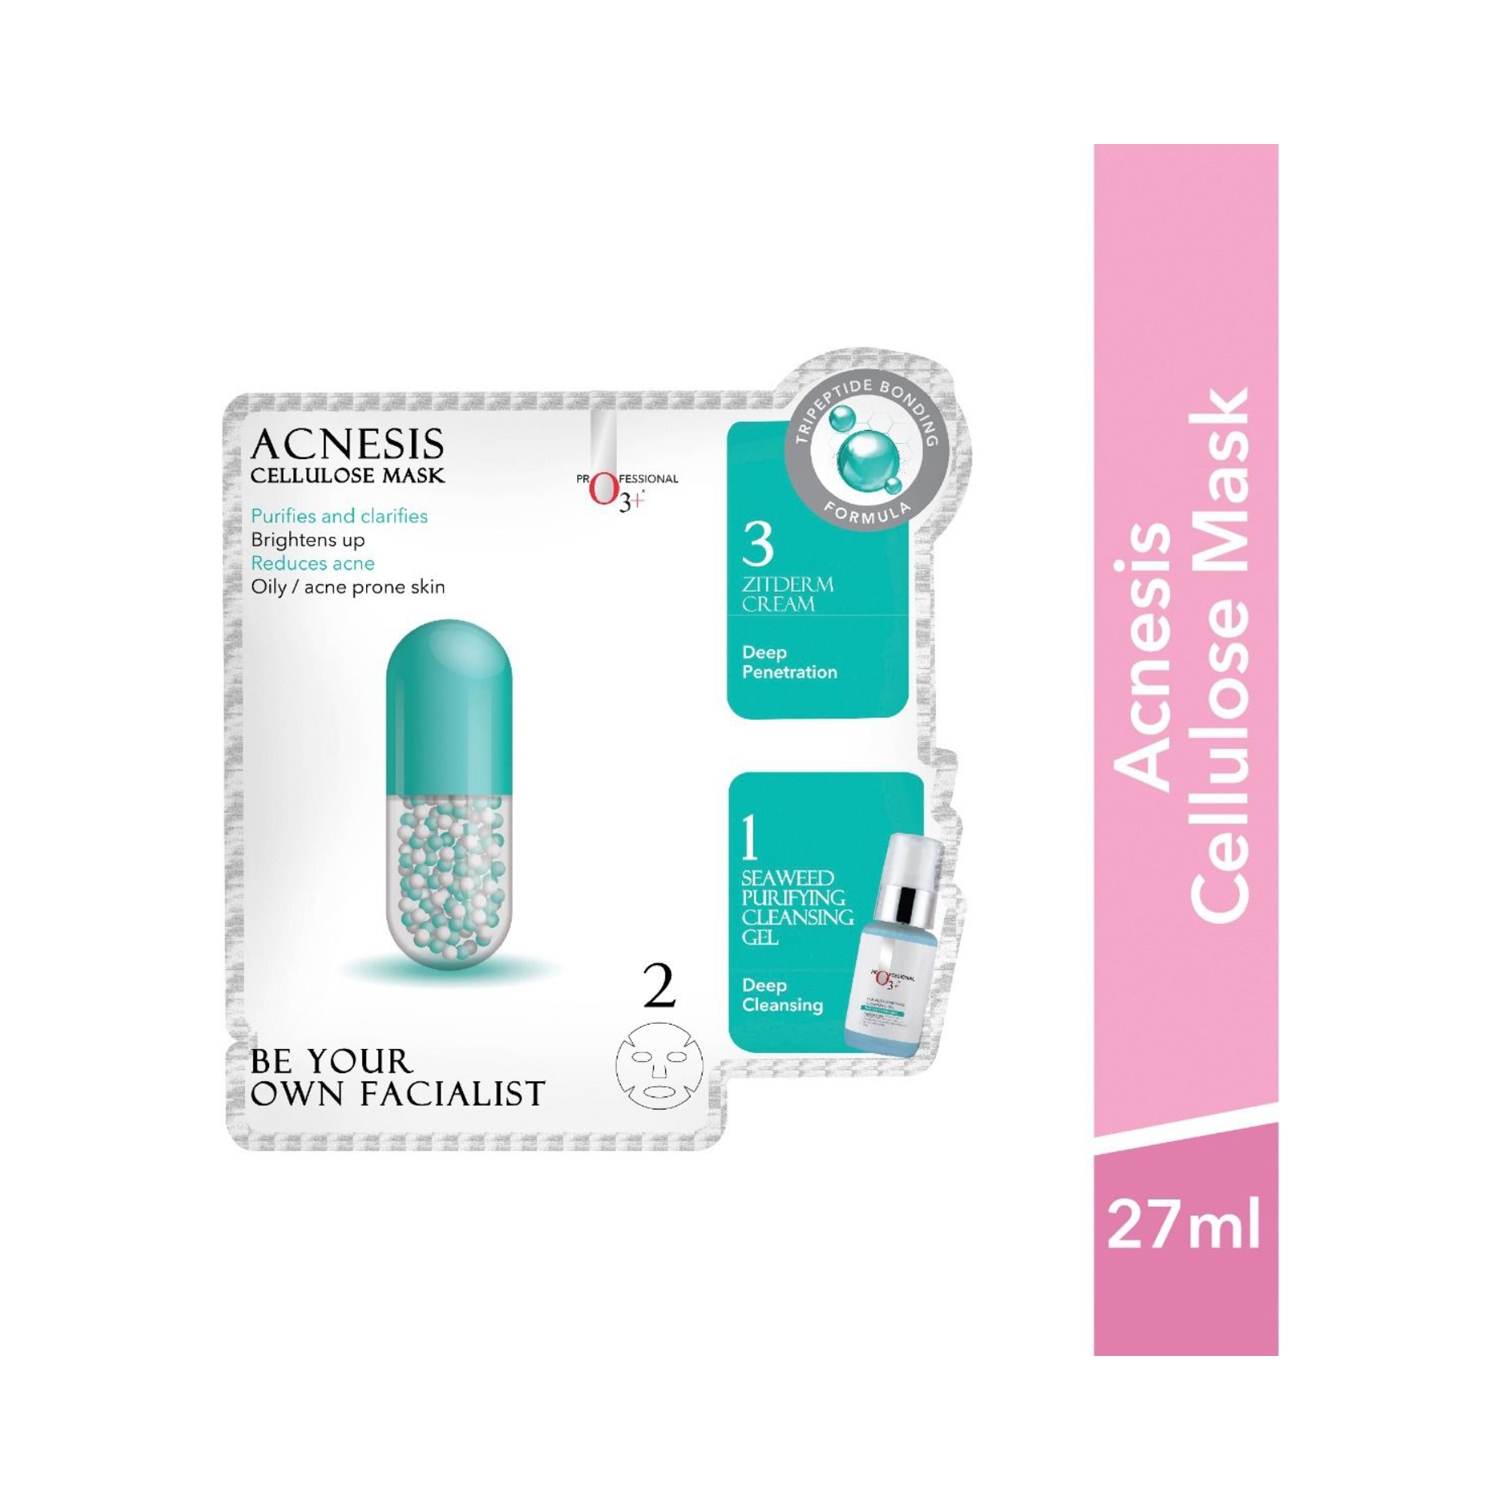 O3+ Acnesis Cellulose Mask (27ml+2g)